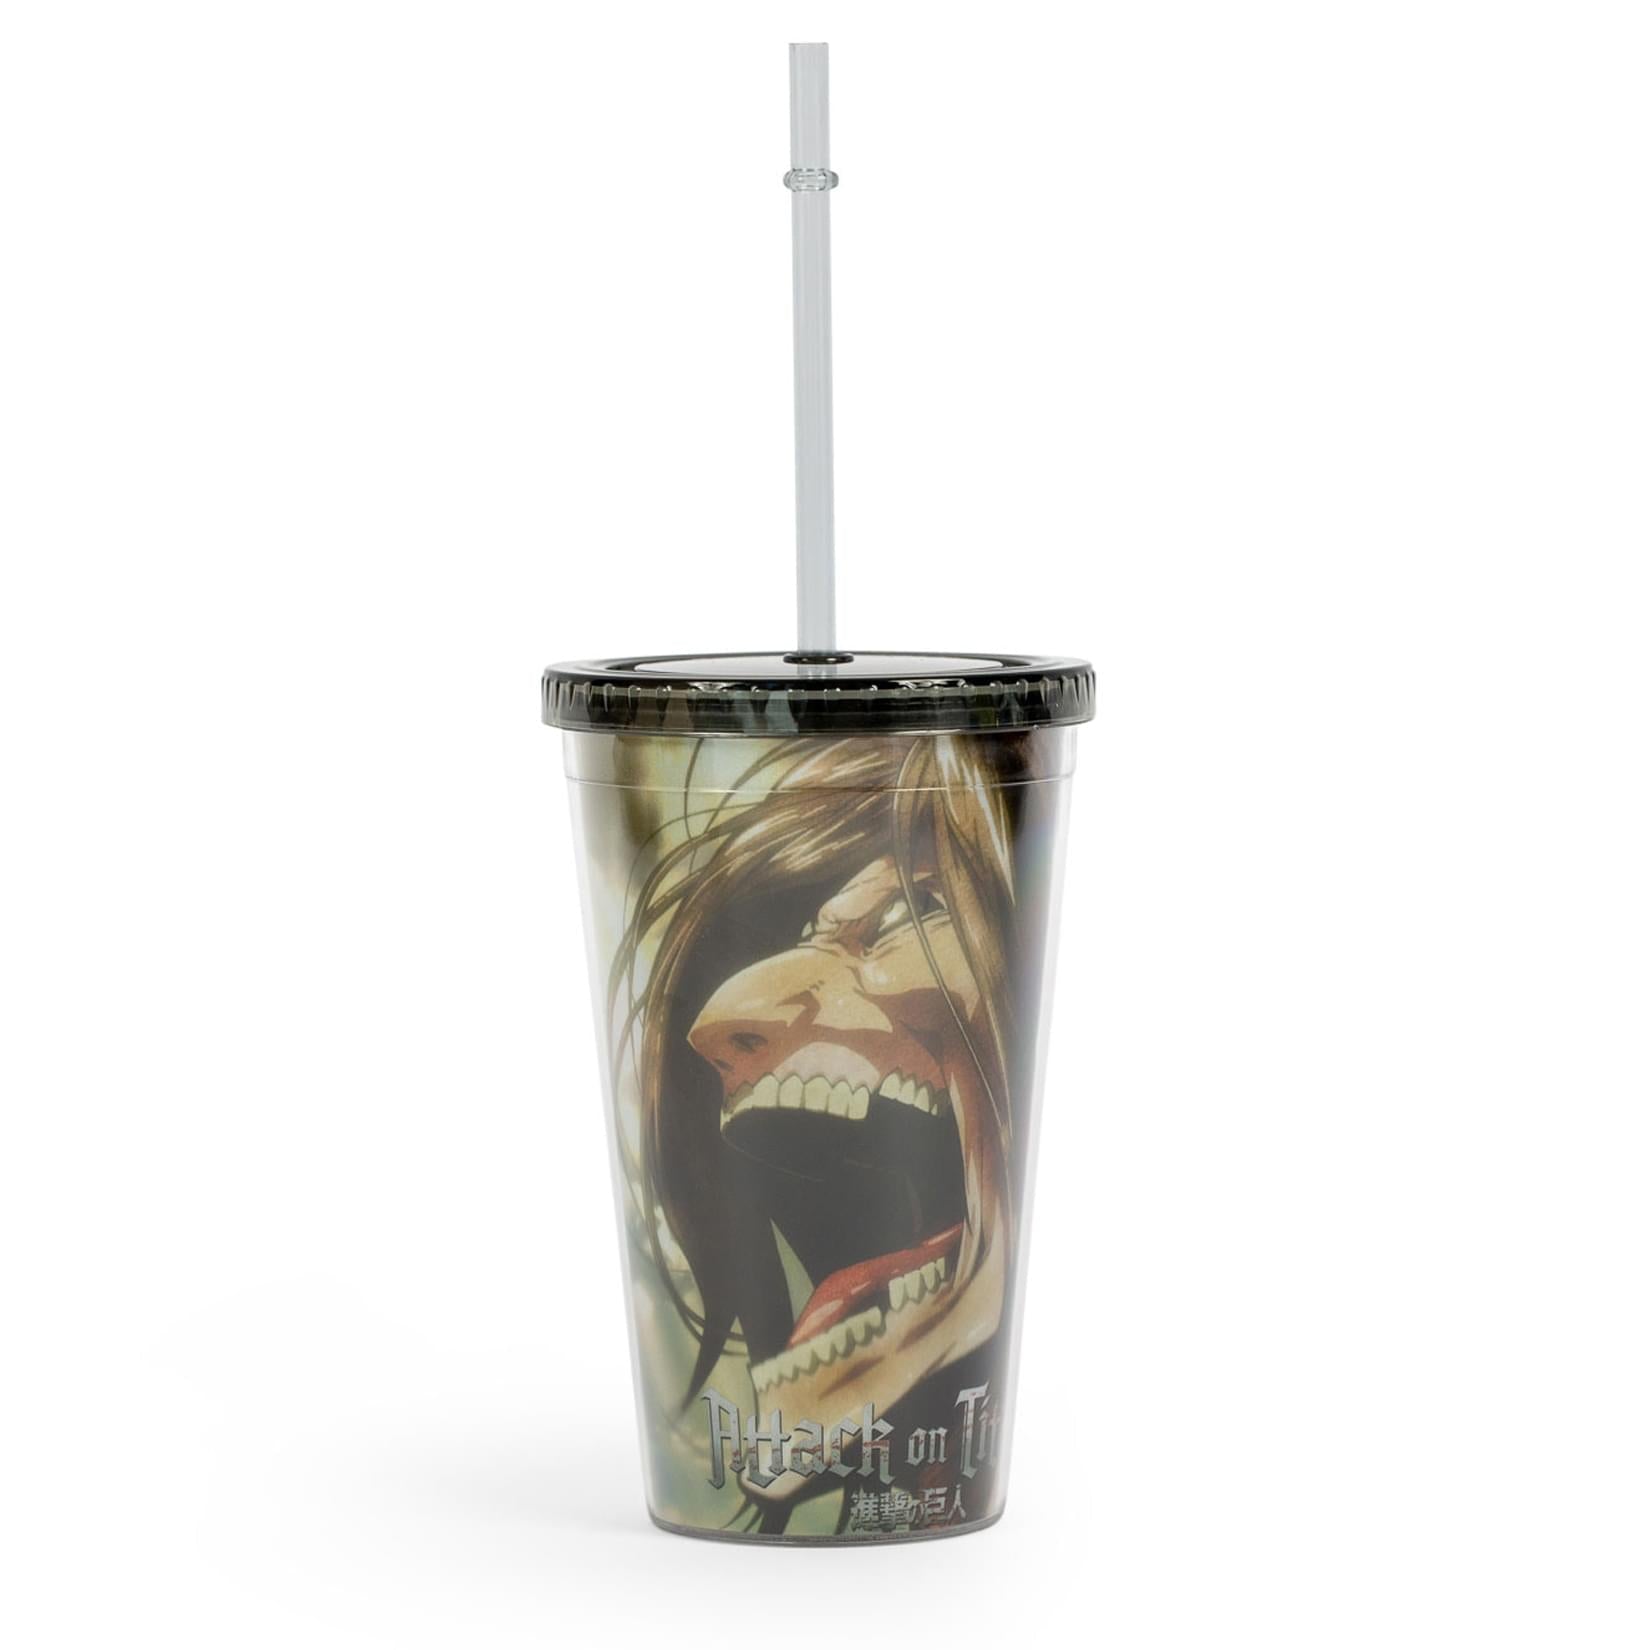 Attack On Titan Eren Yeager Titan Screaming Carnival Cup With Straw | 16 Ounces